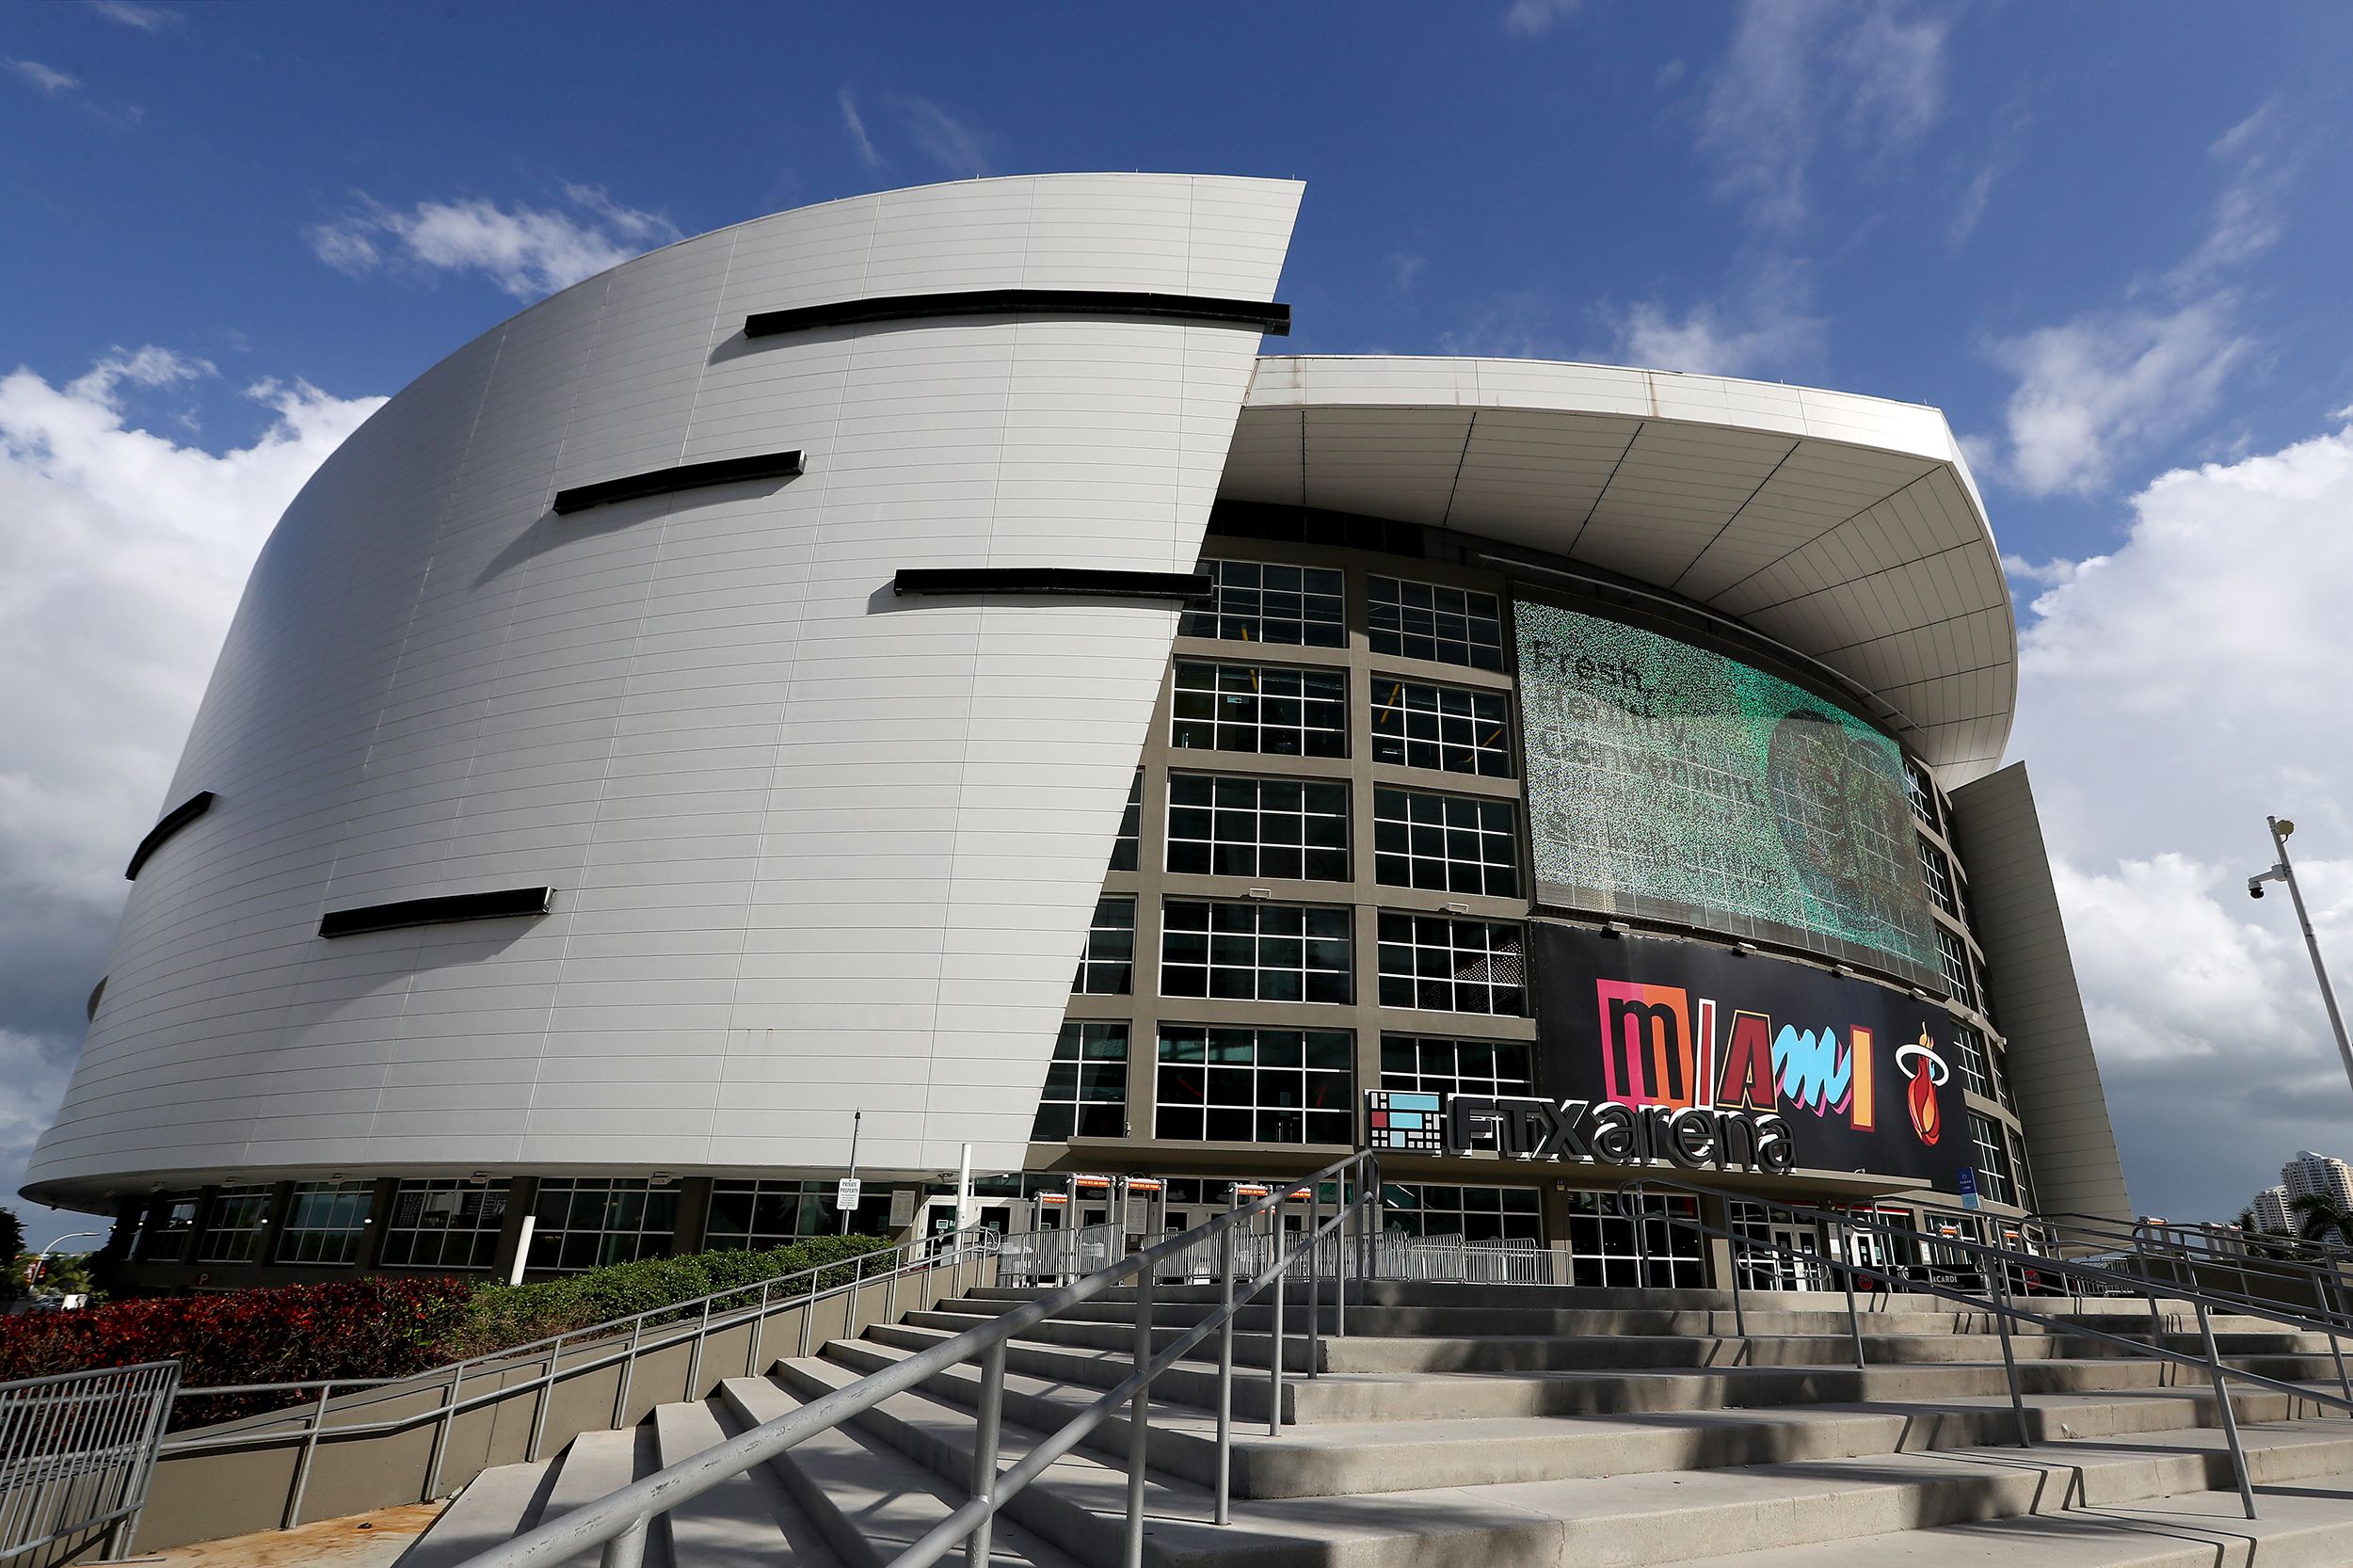 Miami Heat home arena gets temporary name after FTX collapse